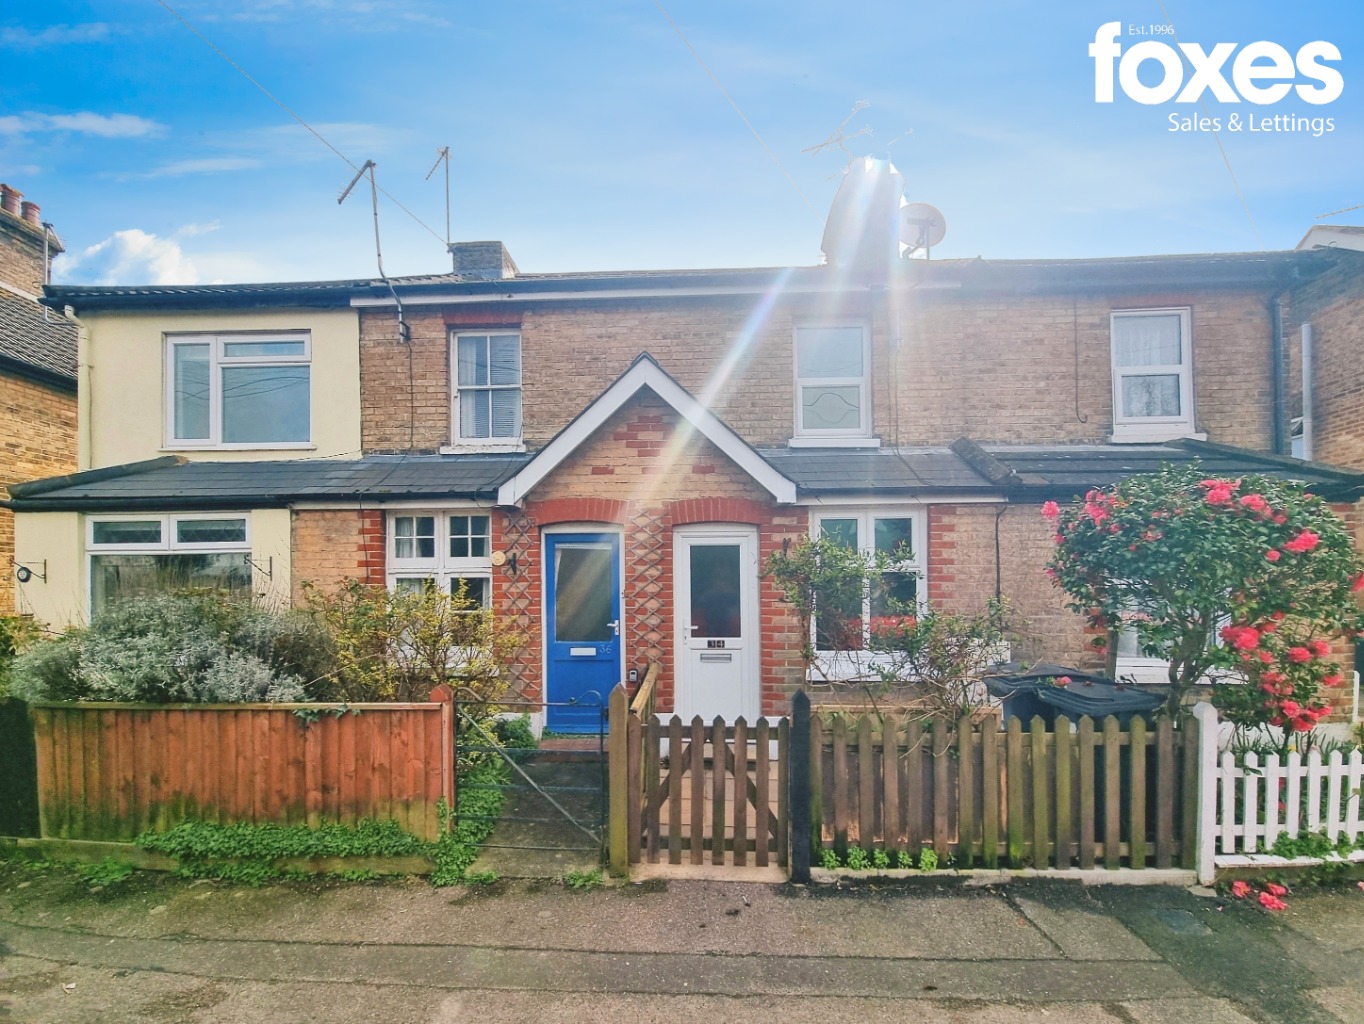 2 bed terraced house for sale in North Road, Bournemouth - Property Image 1